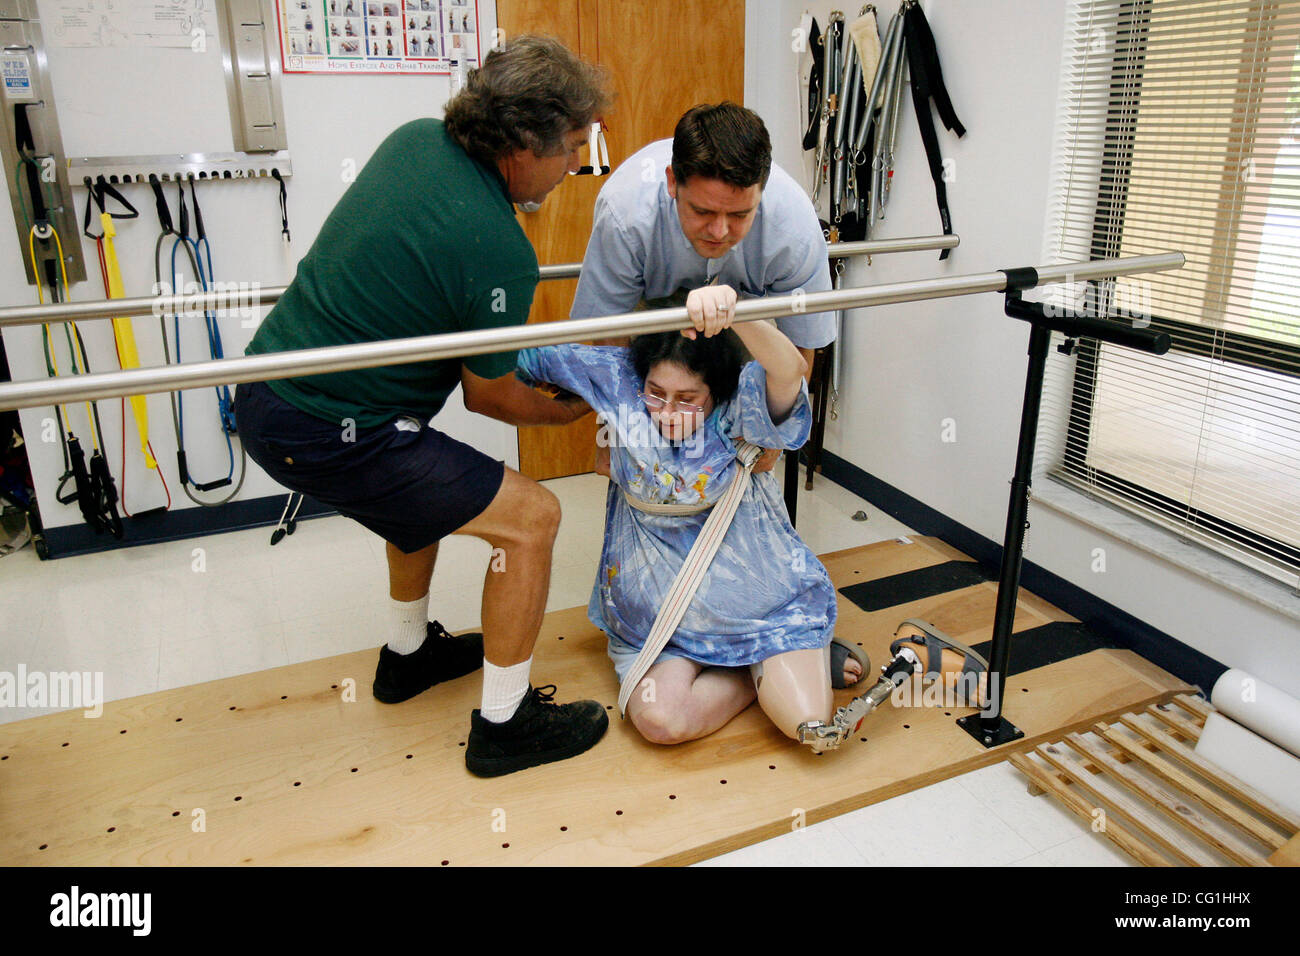 Aug 16, 2007 - Atlantis, FL, USA - Elissa Wehner takes a fall while walking on the parallel bars during a therapy session.  Her therapist Kenneth O' Sullivan (back, right) and her husband, Tom Wehner (left) help her back on her feet.  Elissa Wehner goes to rehabilitative therapy at JFK hospital's ou Stock Photo